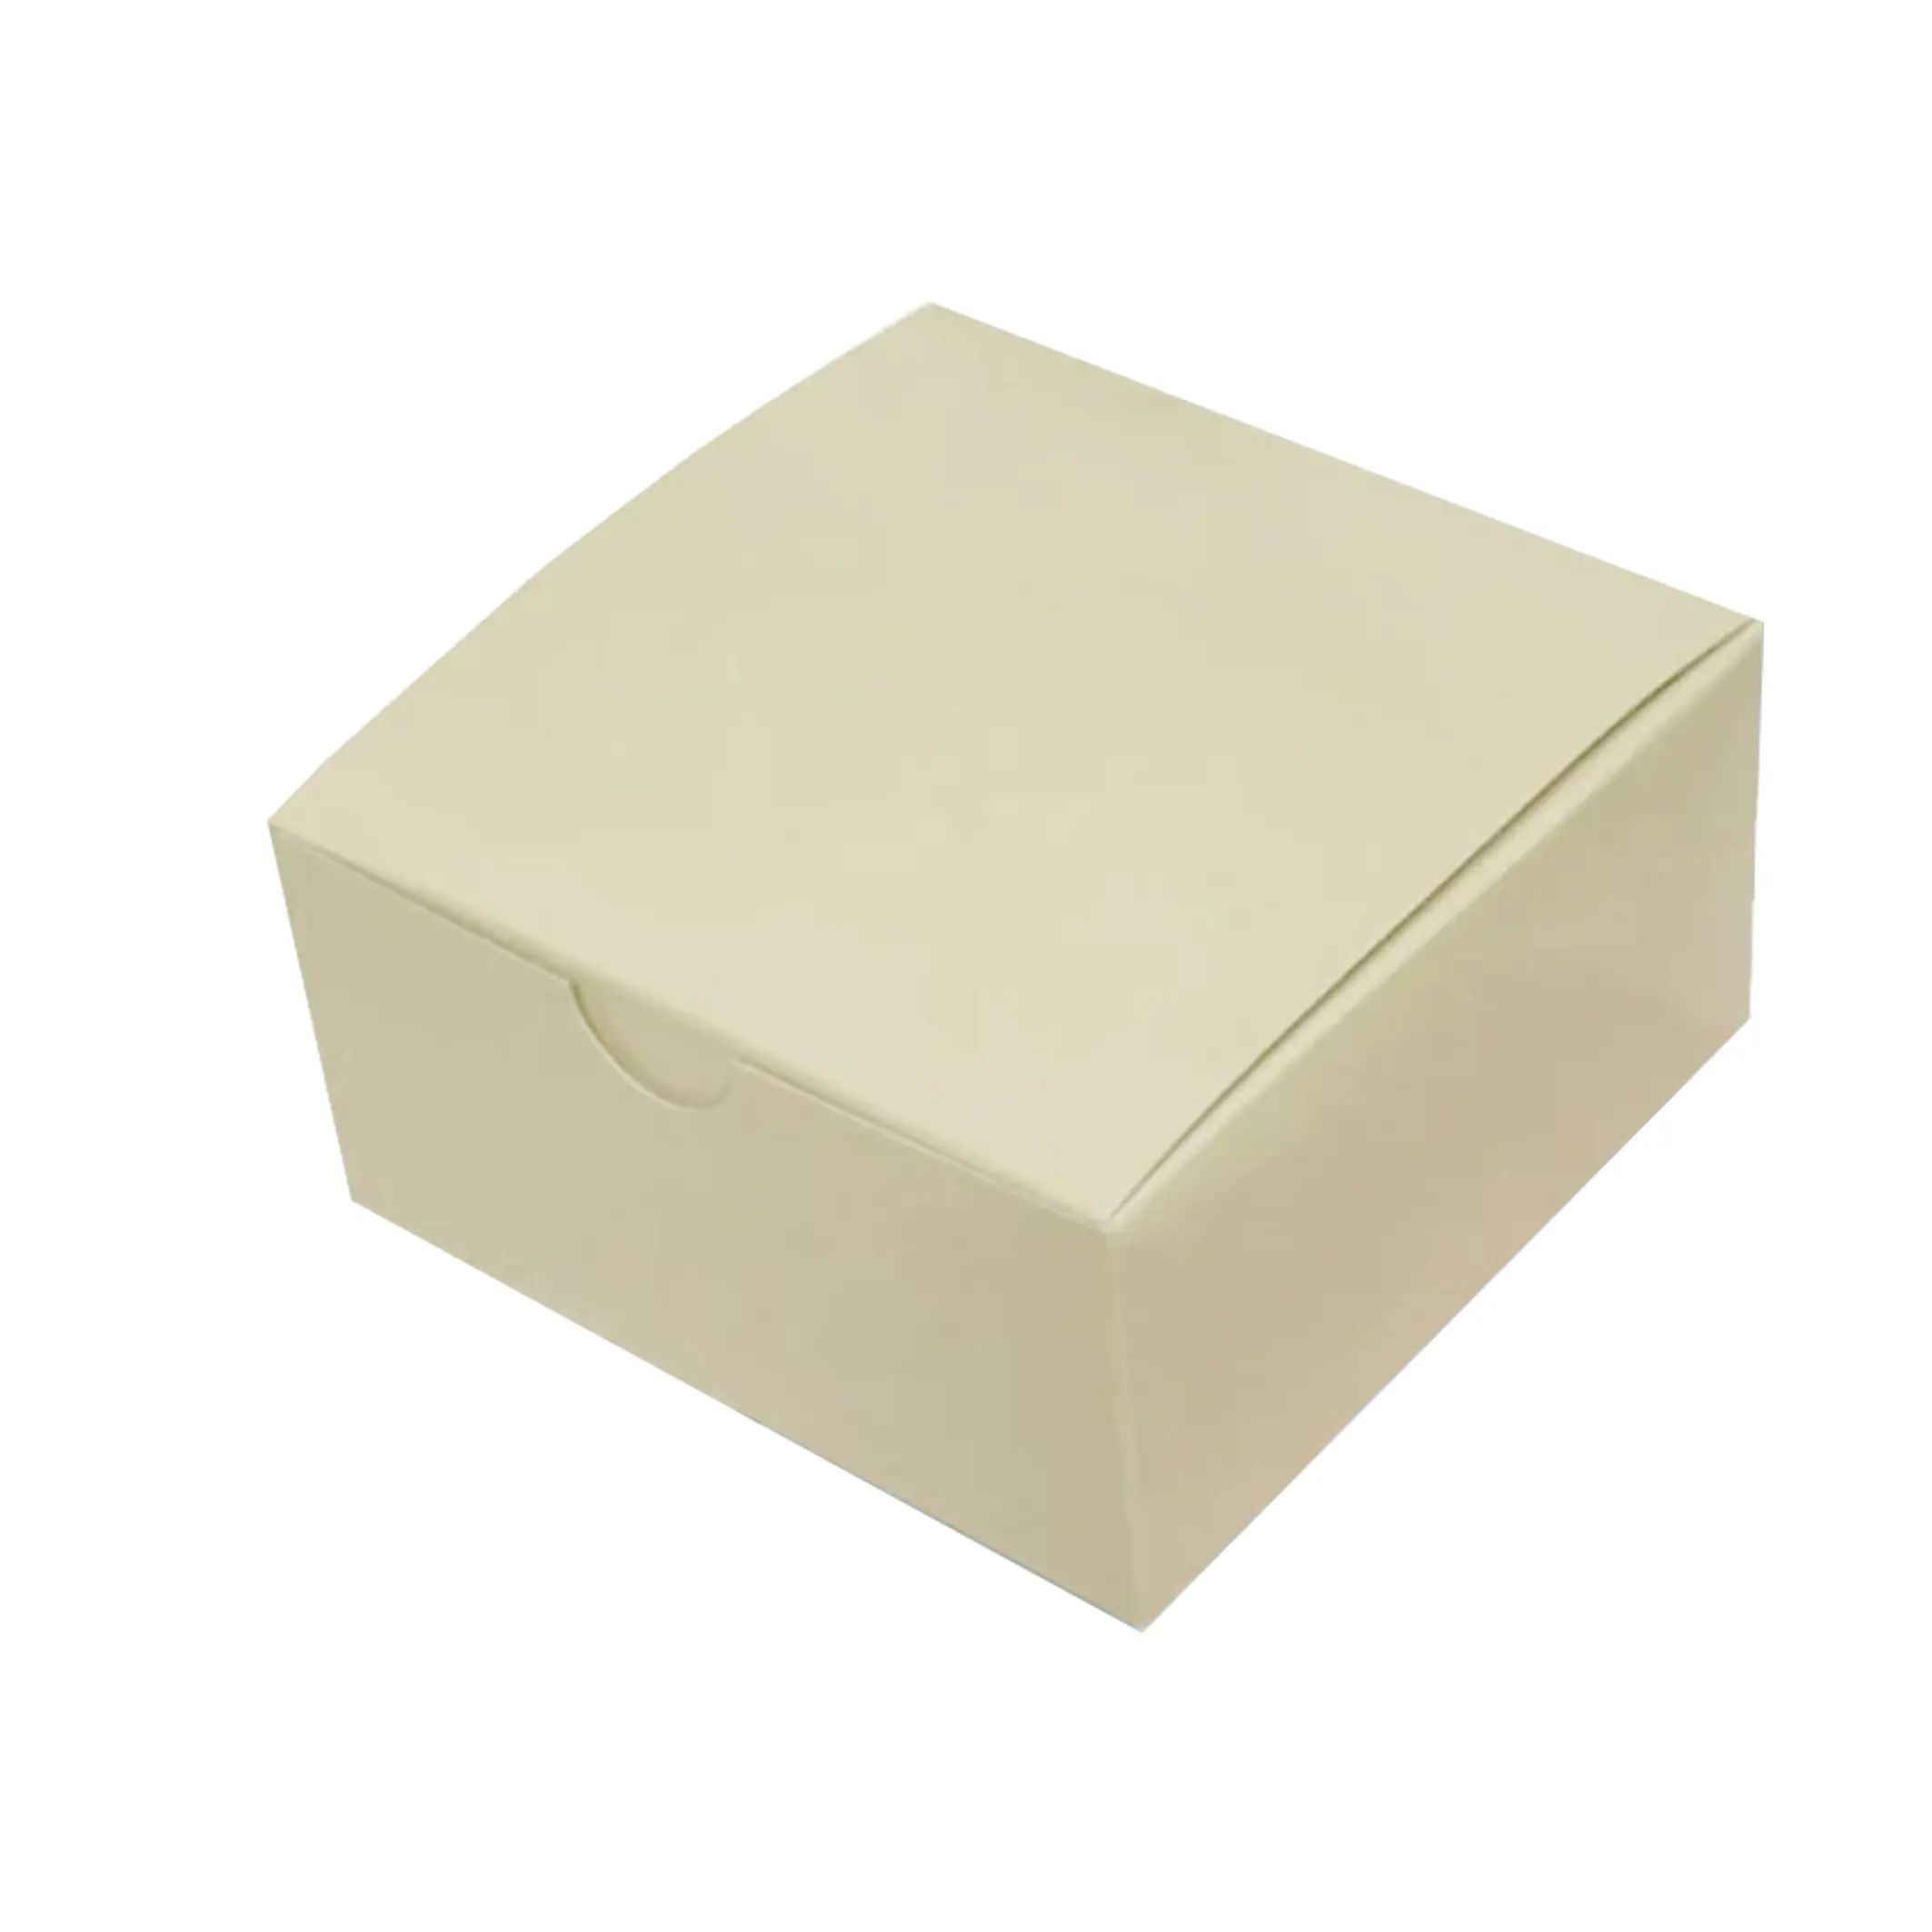 Ivory Packaging Food & Beverage Packaging Favor Boxes Mini Cake Boxes in Bulk 12 Inch Cake